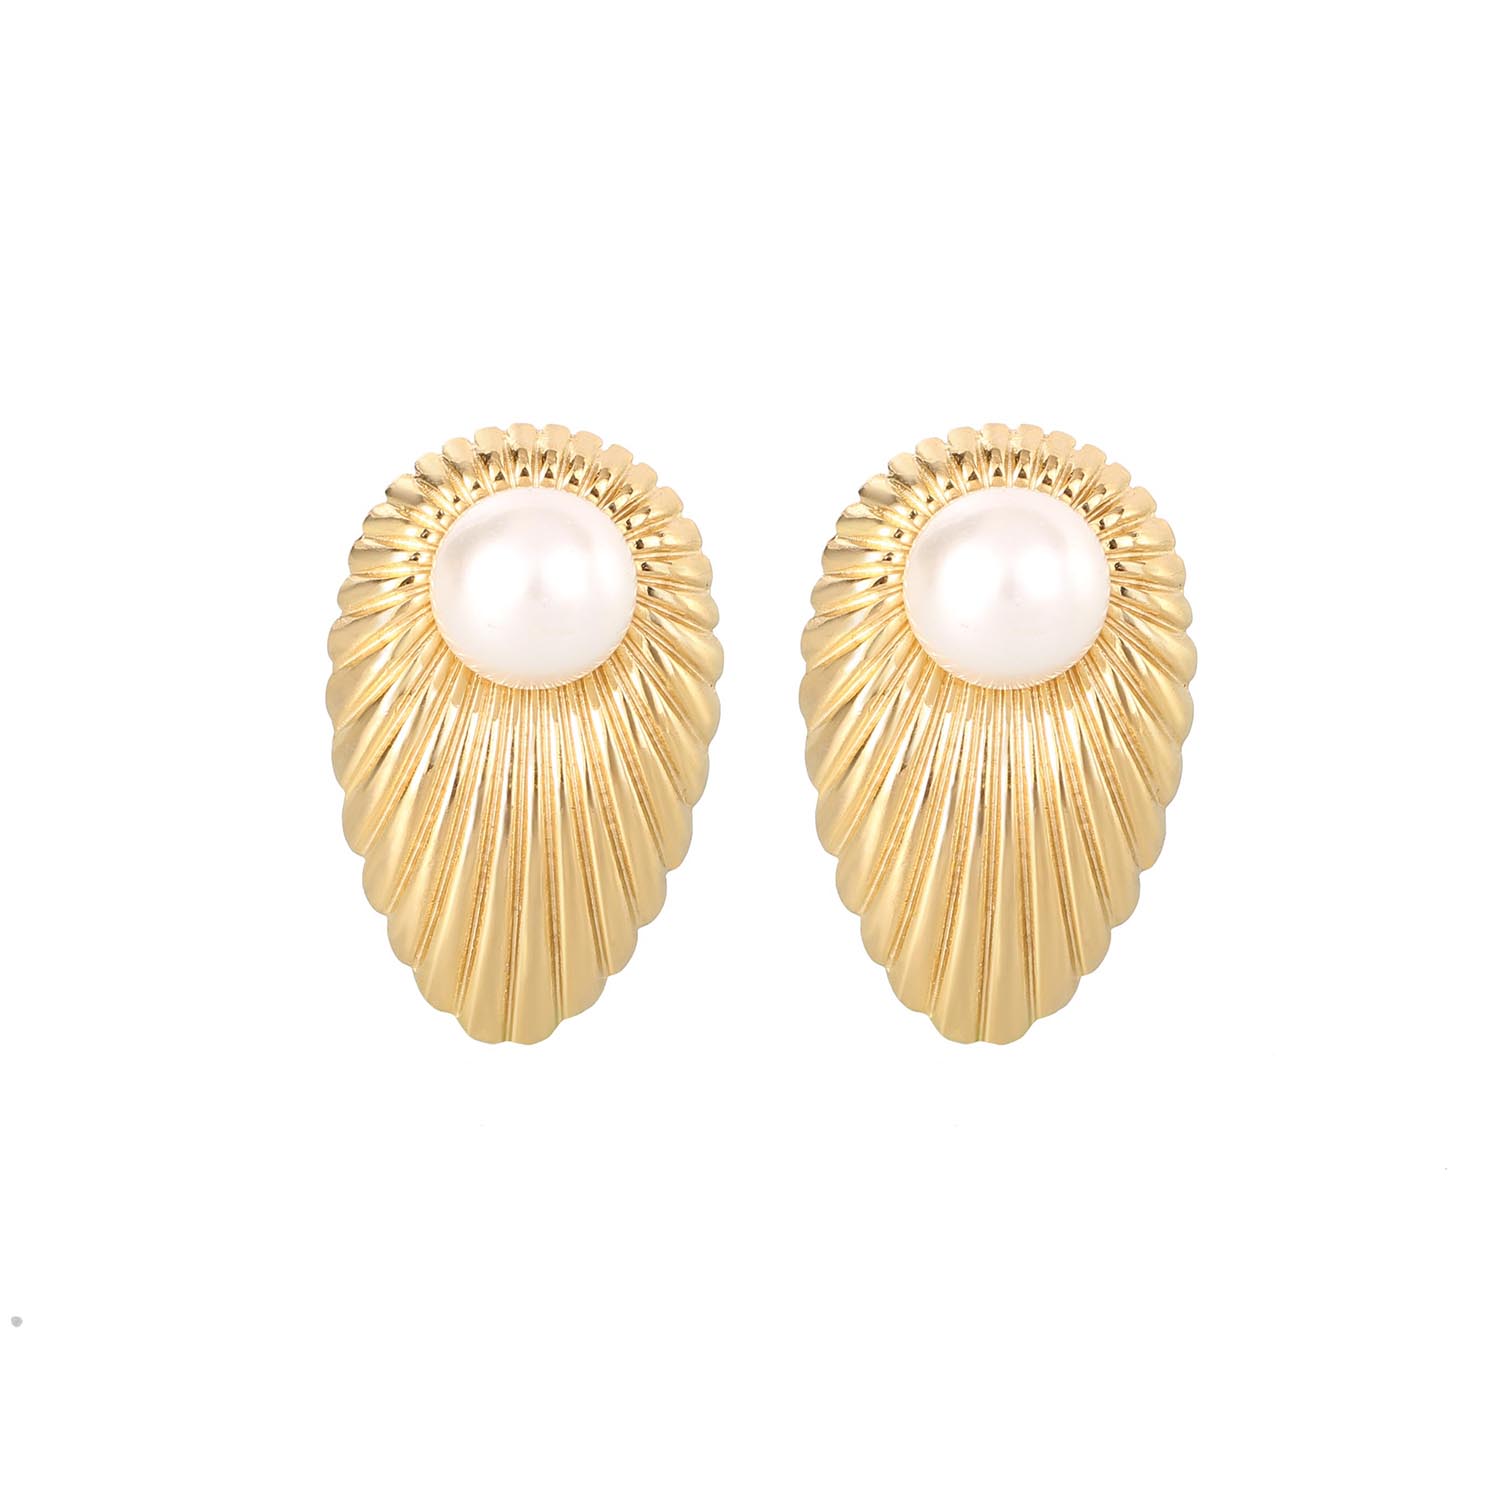 French Vintage Fashion 18K Gold Plated Stainless Steel Pearl Stud Earrings Jewelry For Women